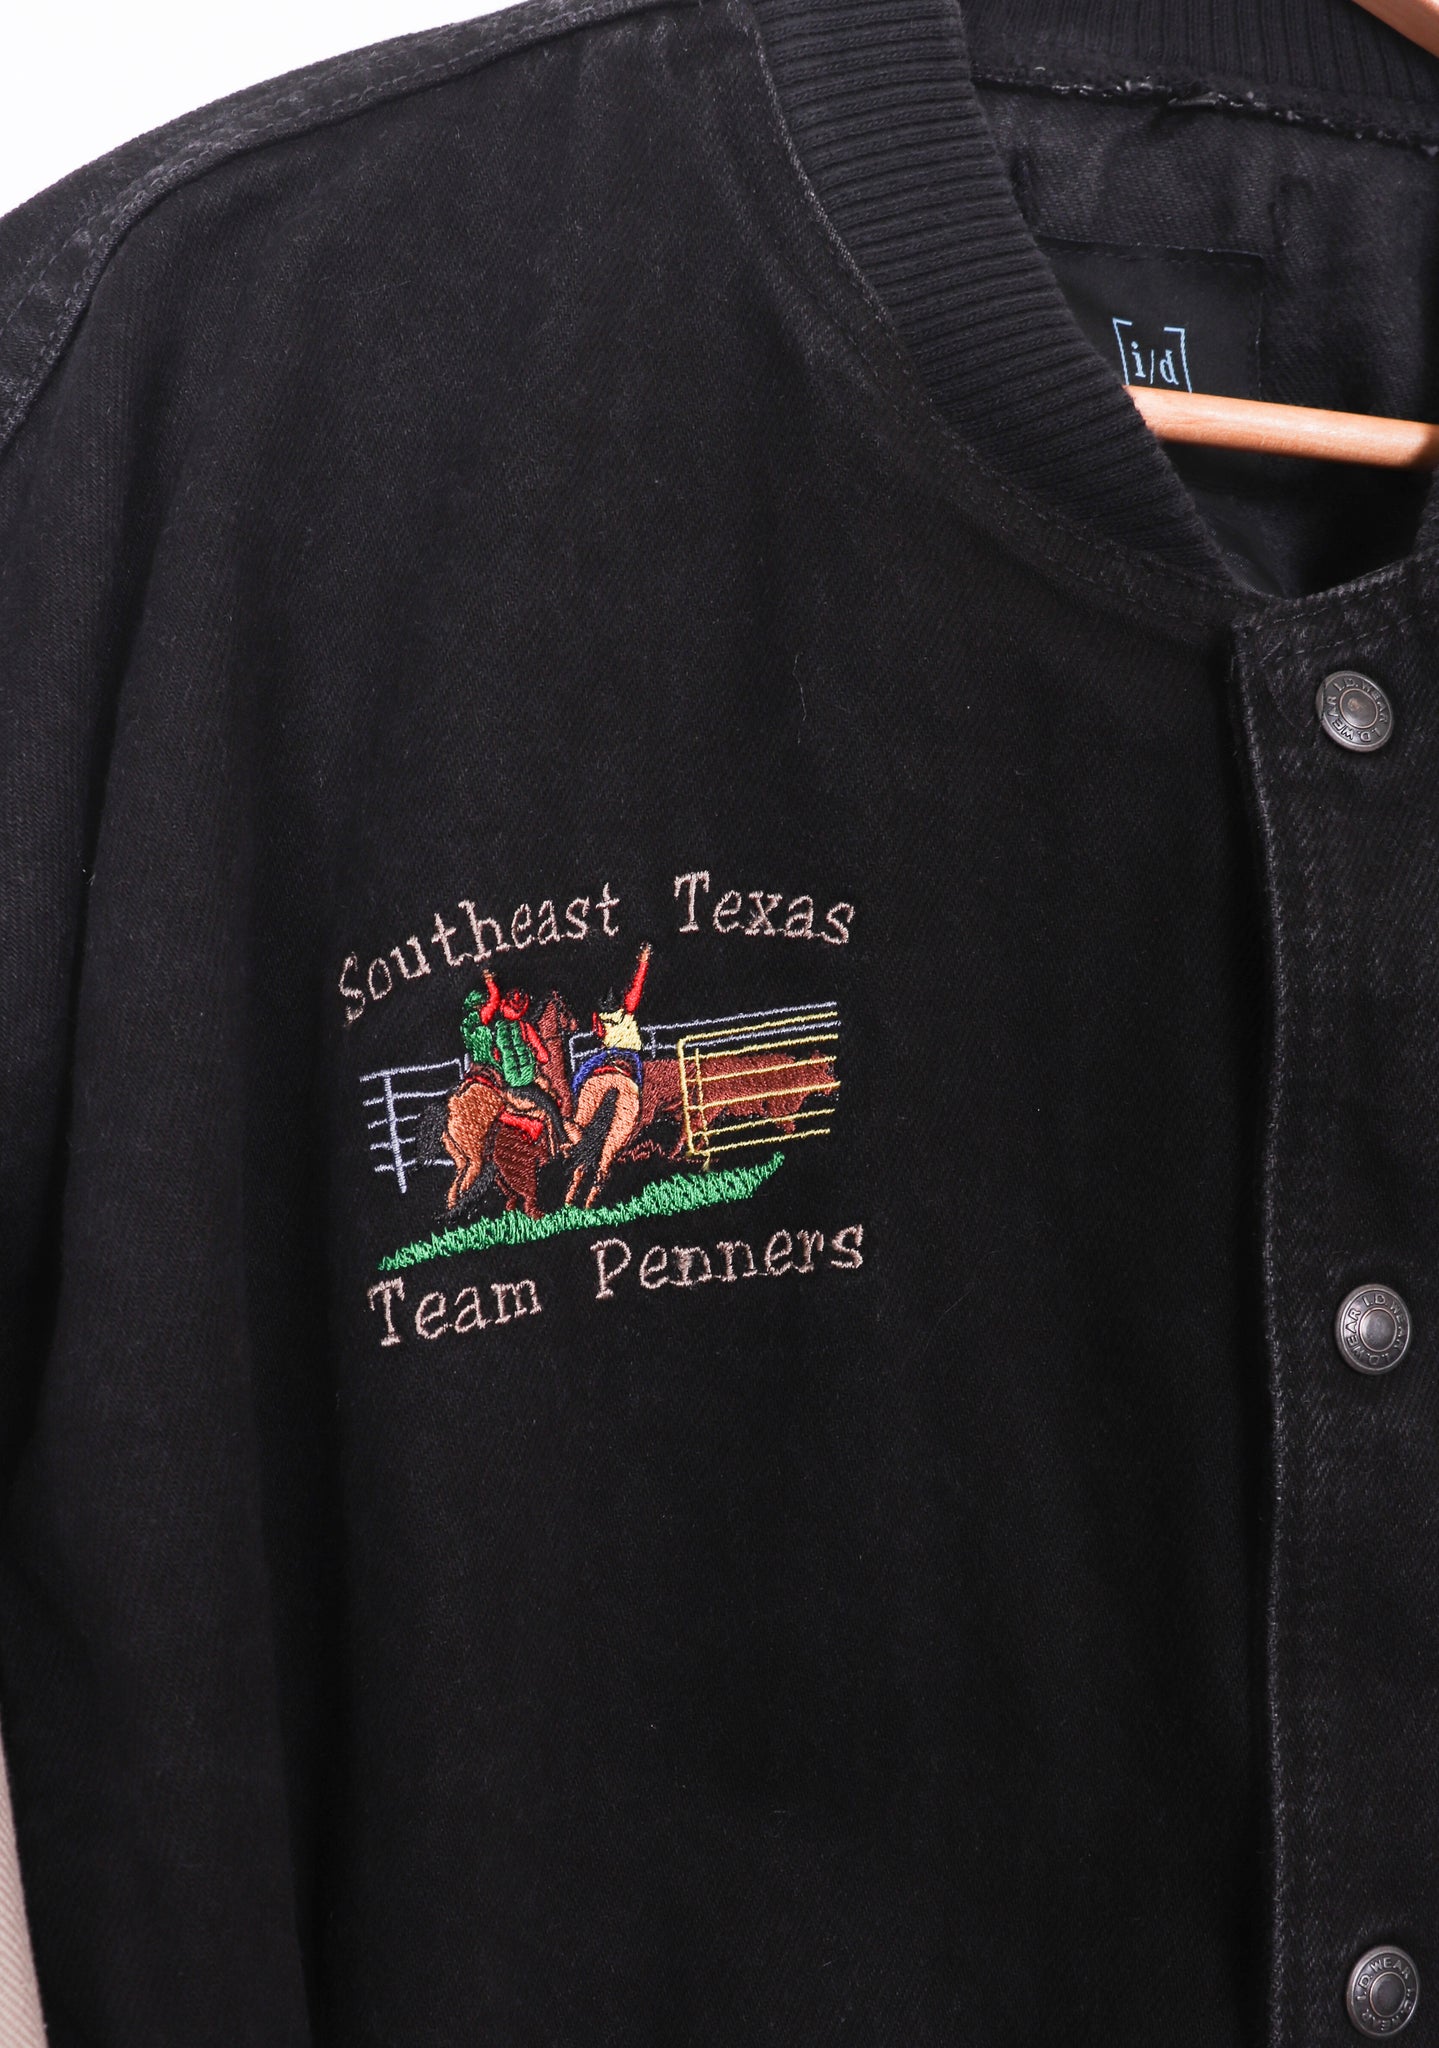 Southeast Texas Team Penners Kathy's Bomber Jacket